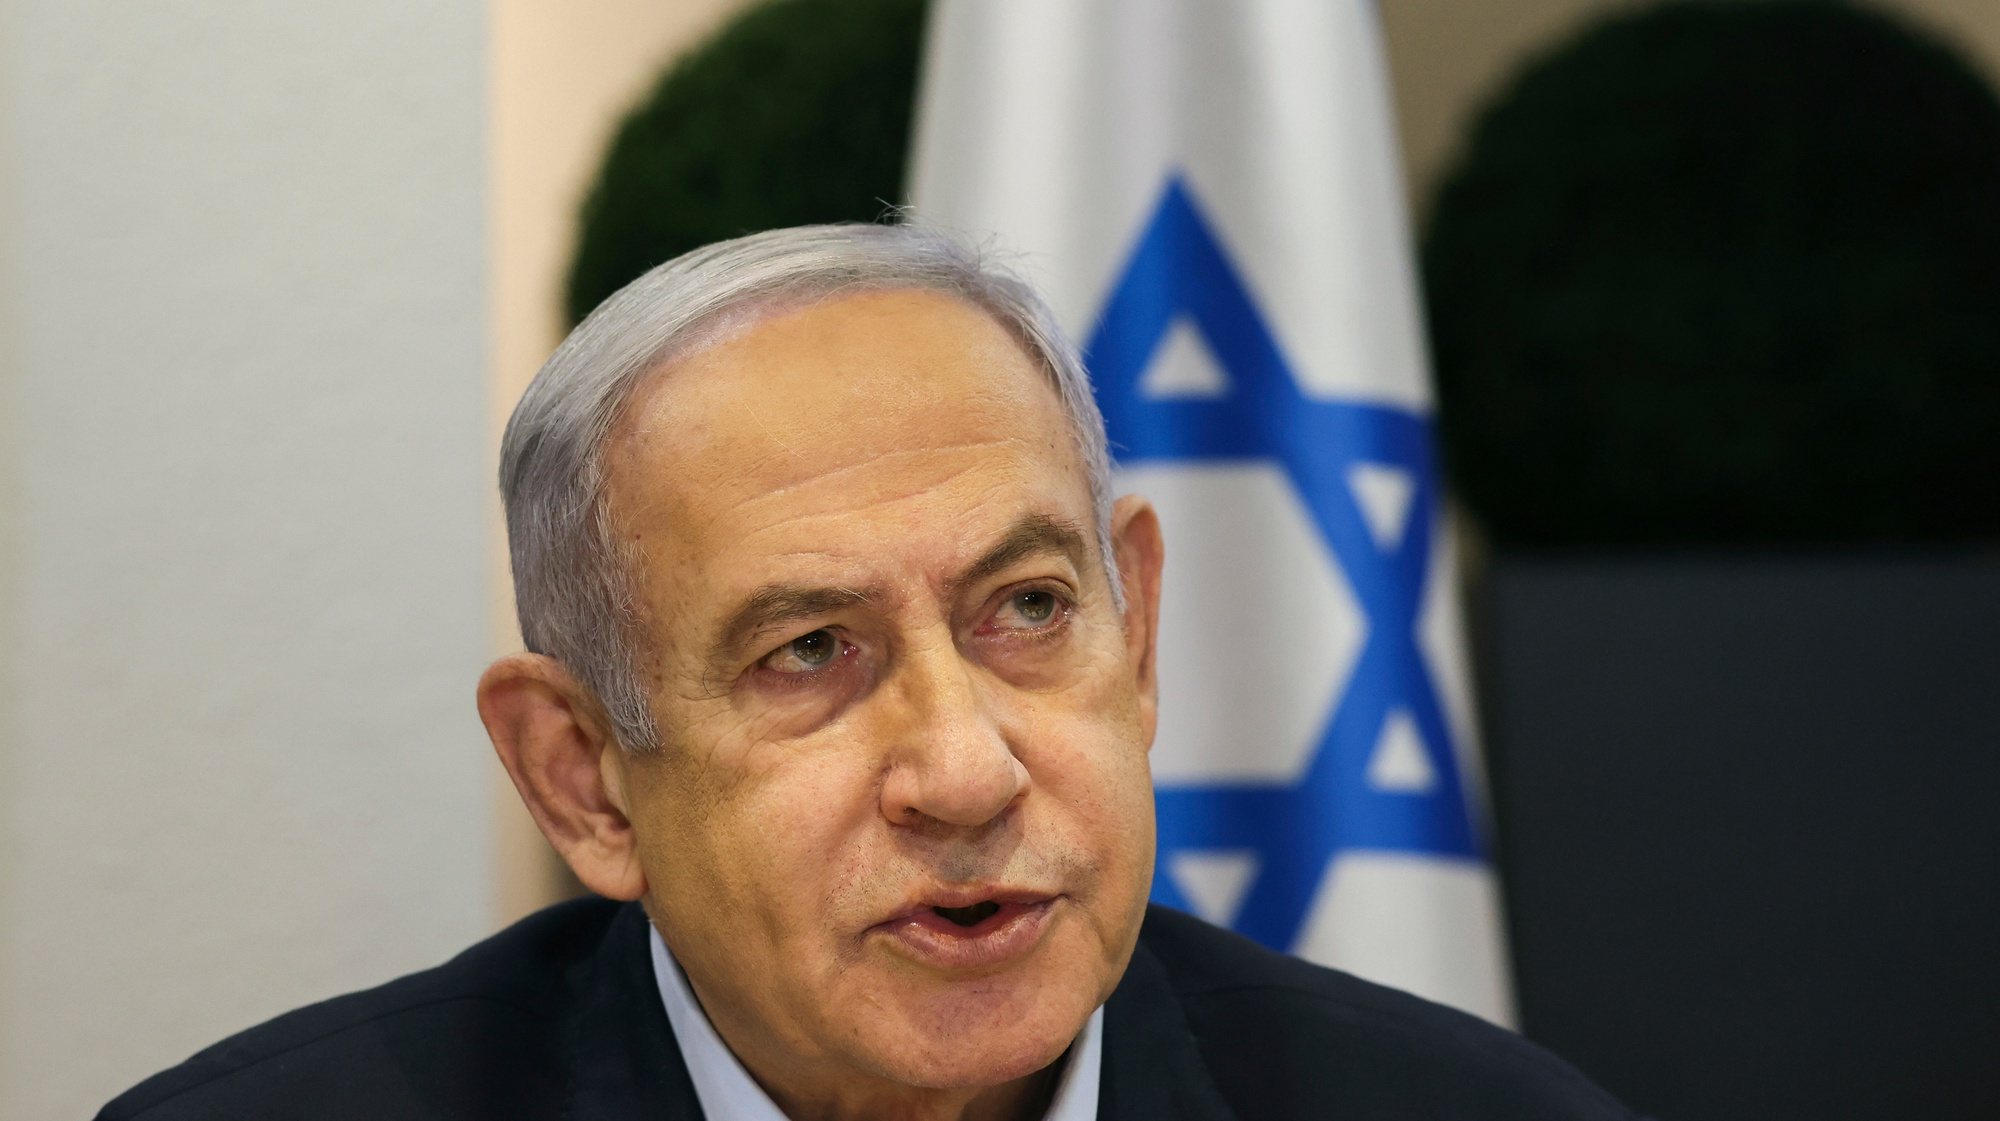 epa11253801 (FILE) - Israeli Prime Minister Benjamin Netanyahu calls the weekly cabinet meeting at the Ministry of Defense in Tel Aviv, Israel, January 7, 2024 (reissued March 31, 2024).  Israeli Prime Minister Benjamin Netanyahu will undergo surgery for a hernia, his office announced on March 31, 2024. EPA / RONEN ZVULUN / POOL